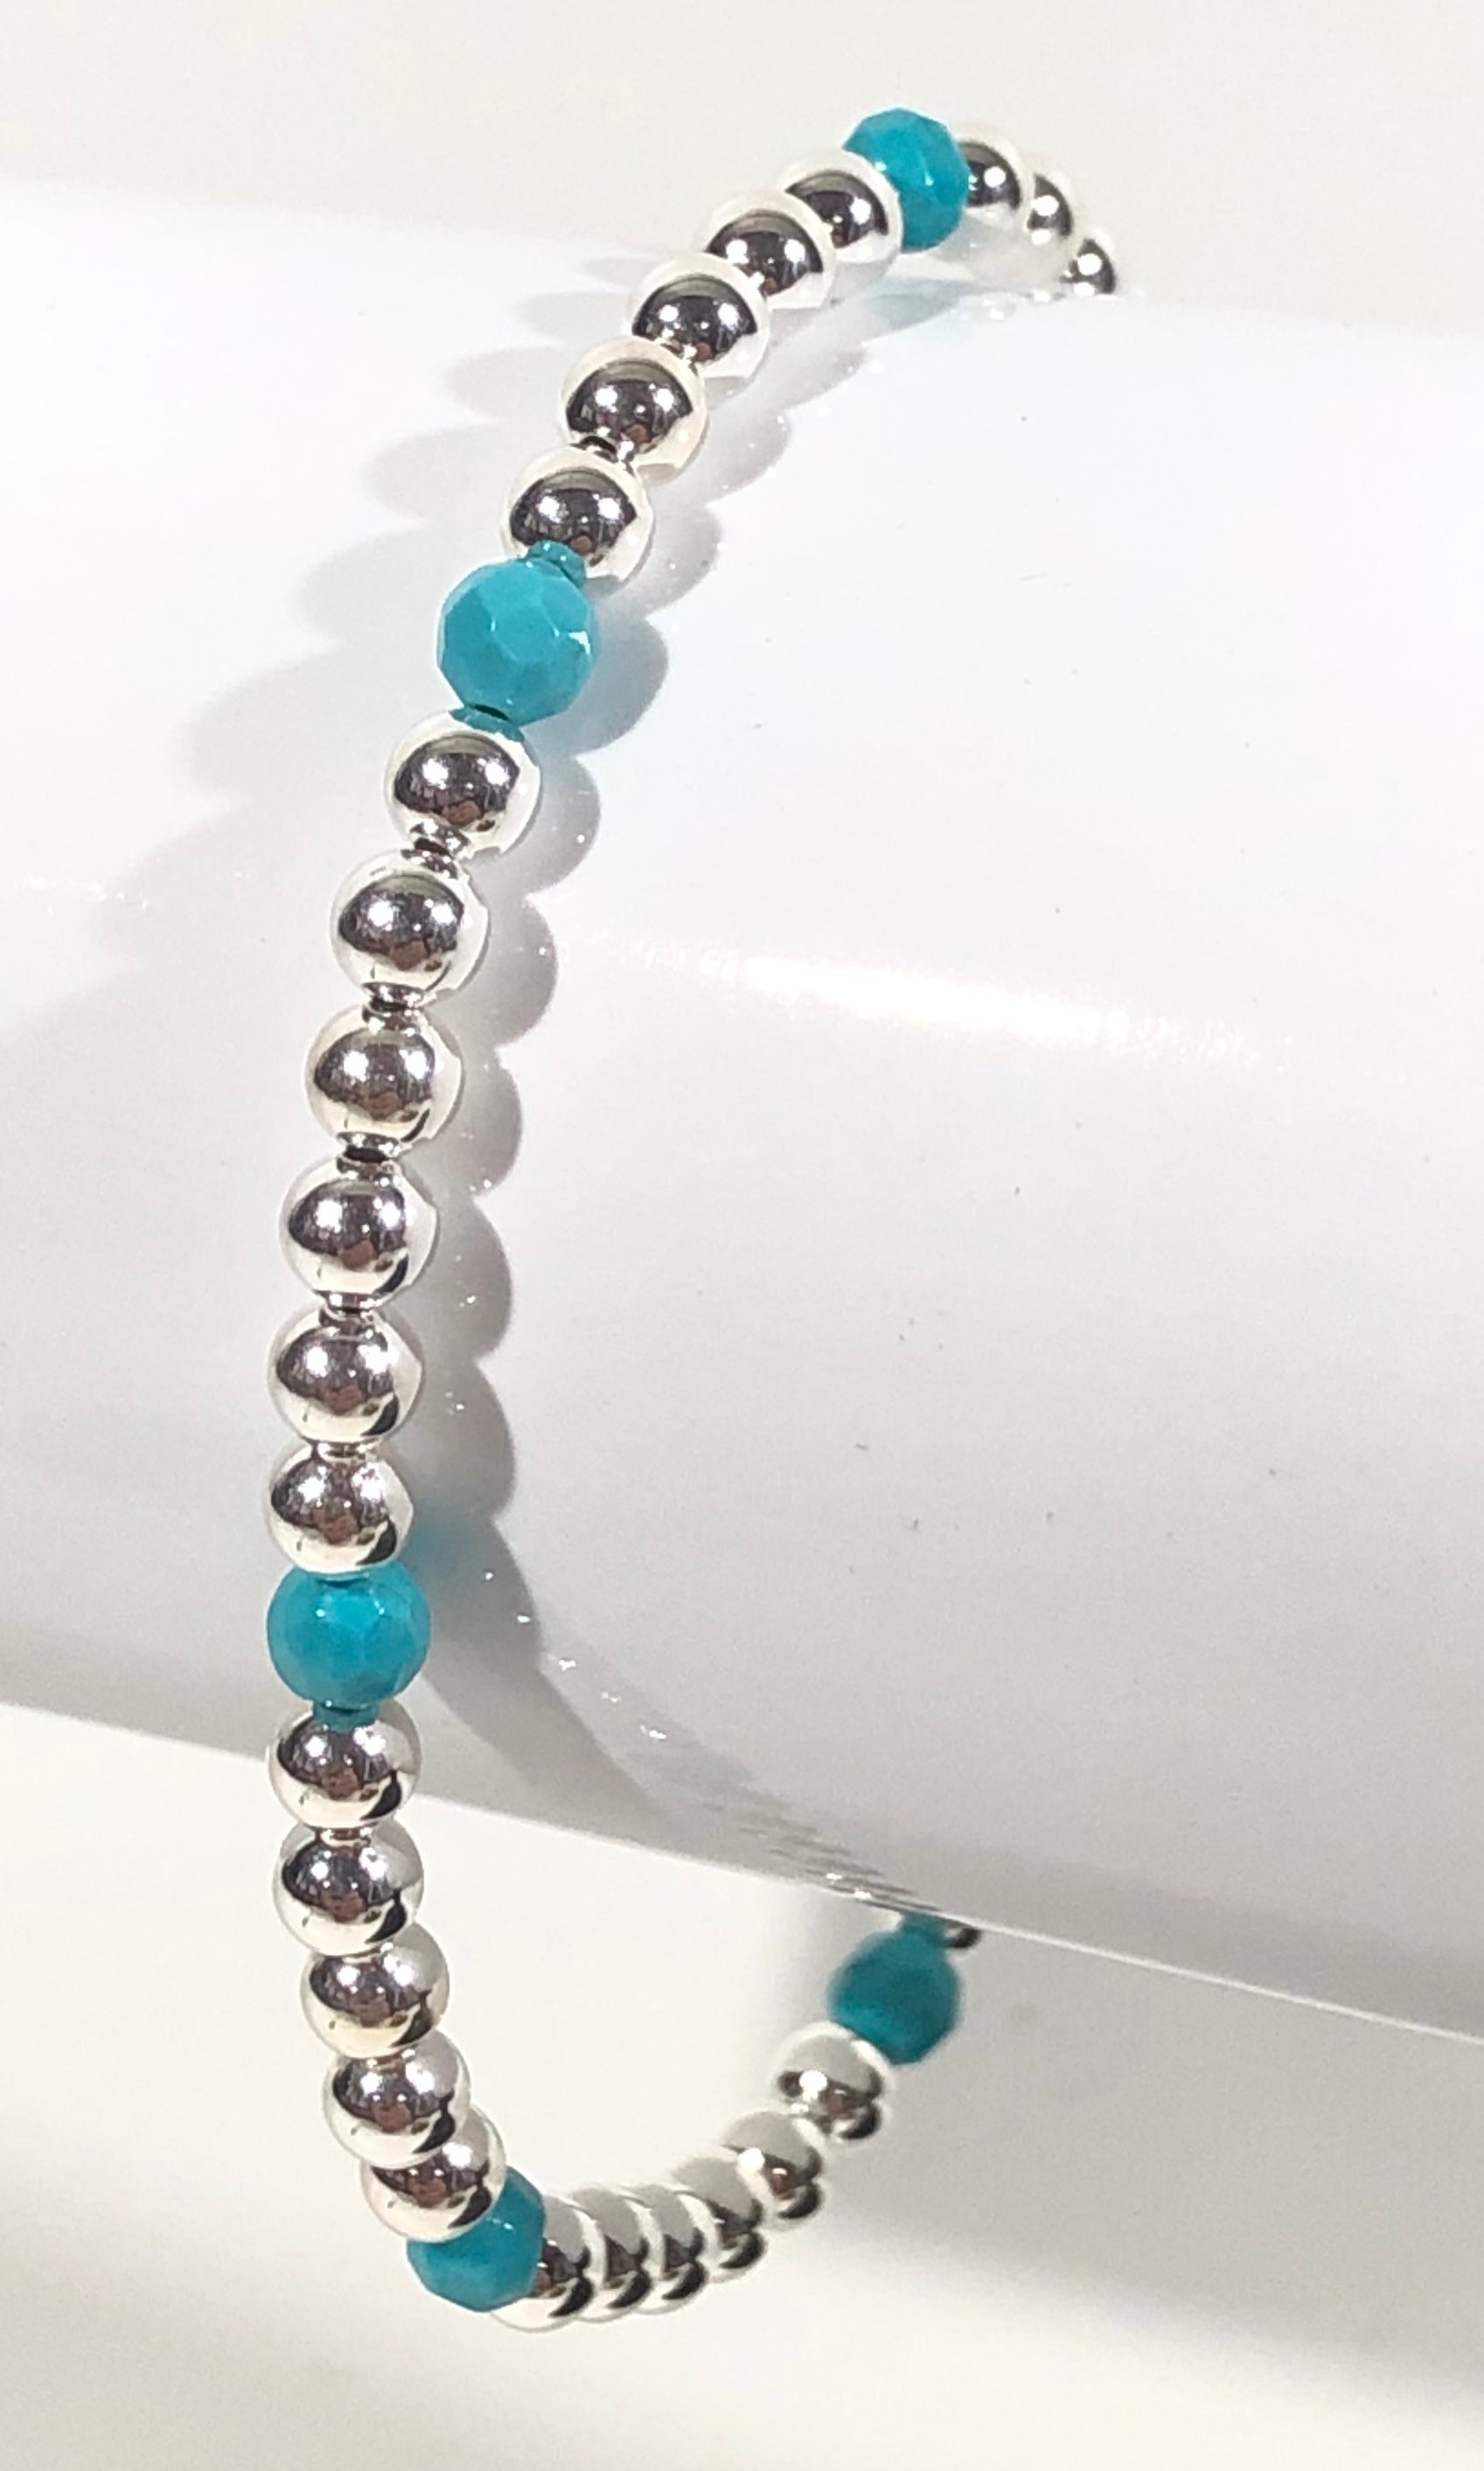 4mm Sterling Silver Bracelet with Turquoise Blue Beads